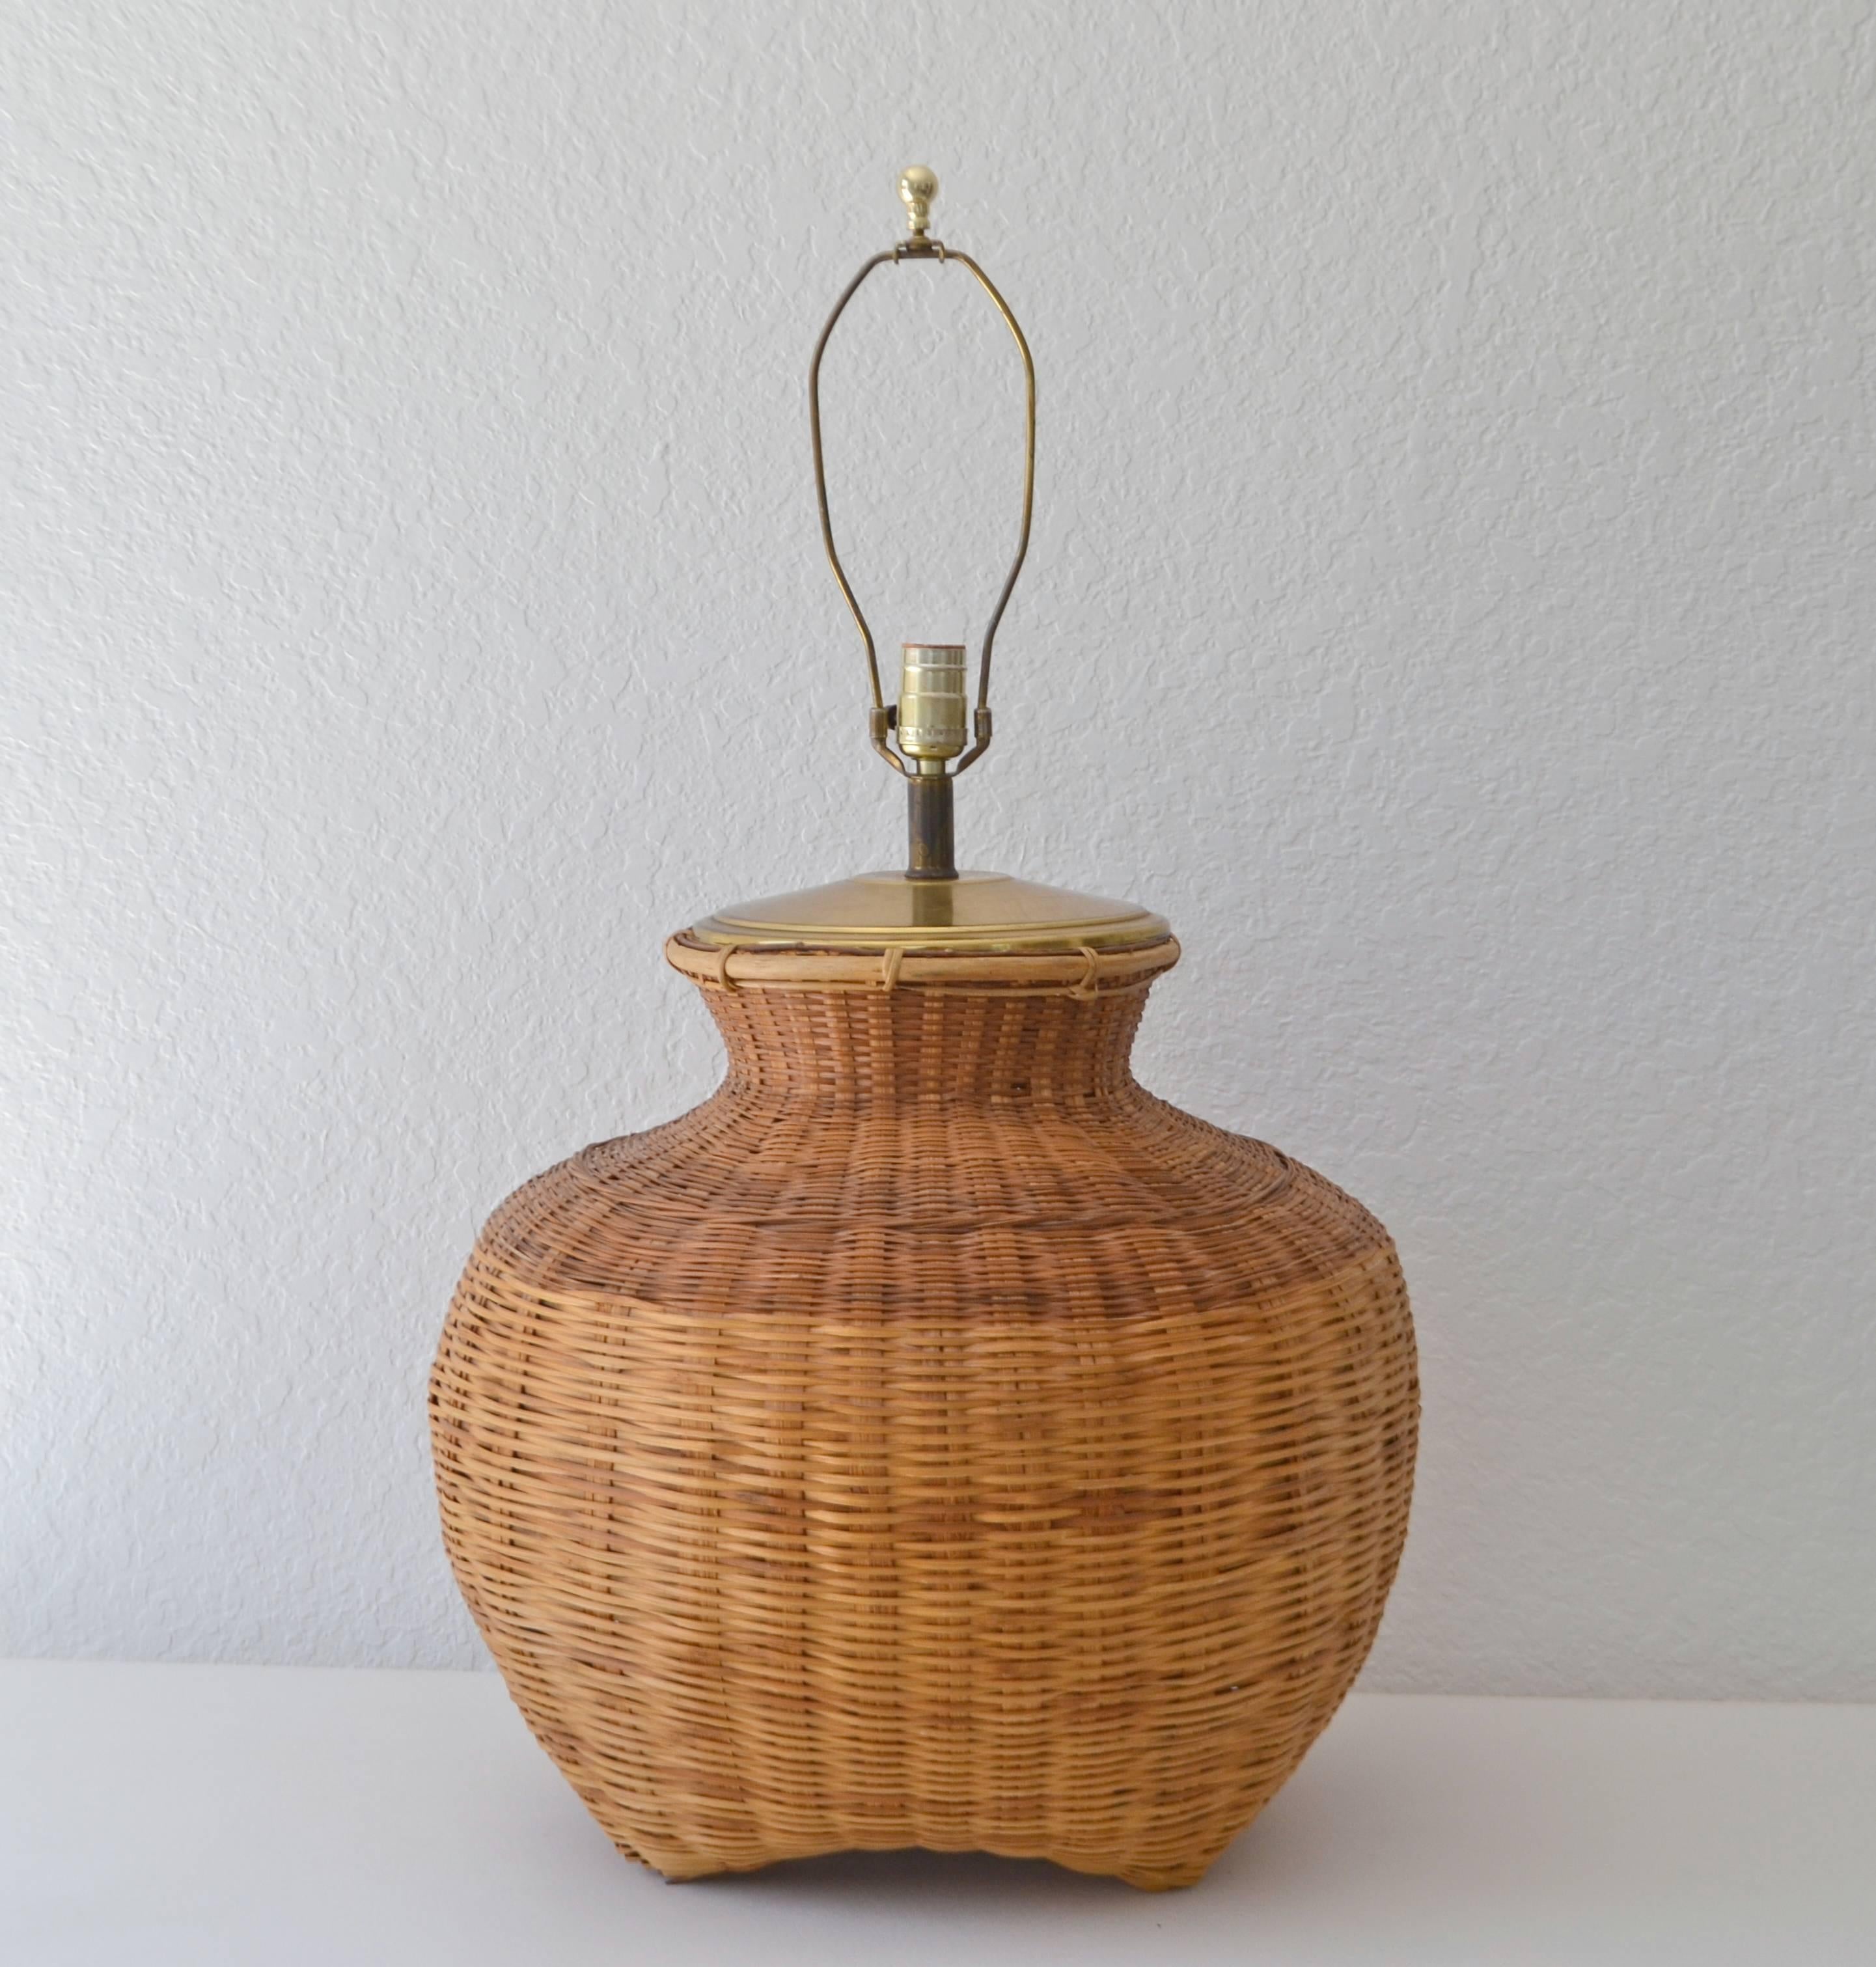 North American Mid-Century Woven Rattan Basket Form Table Lamp